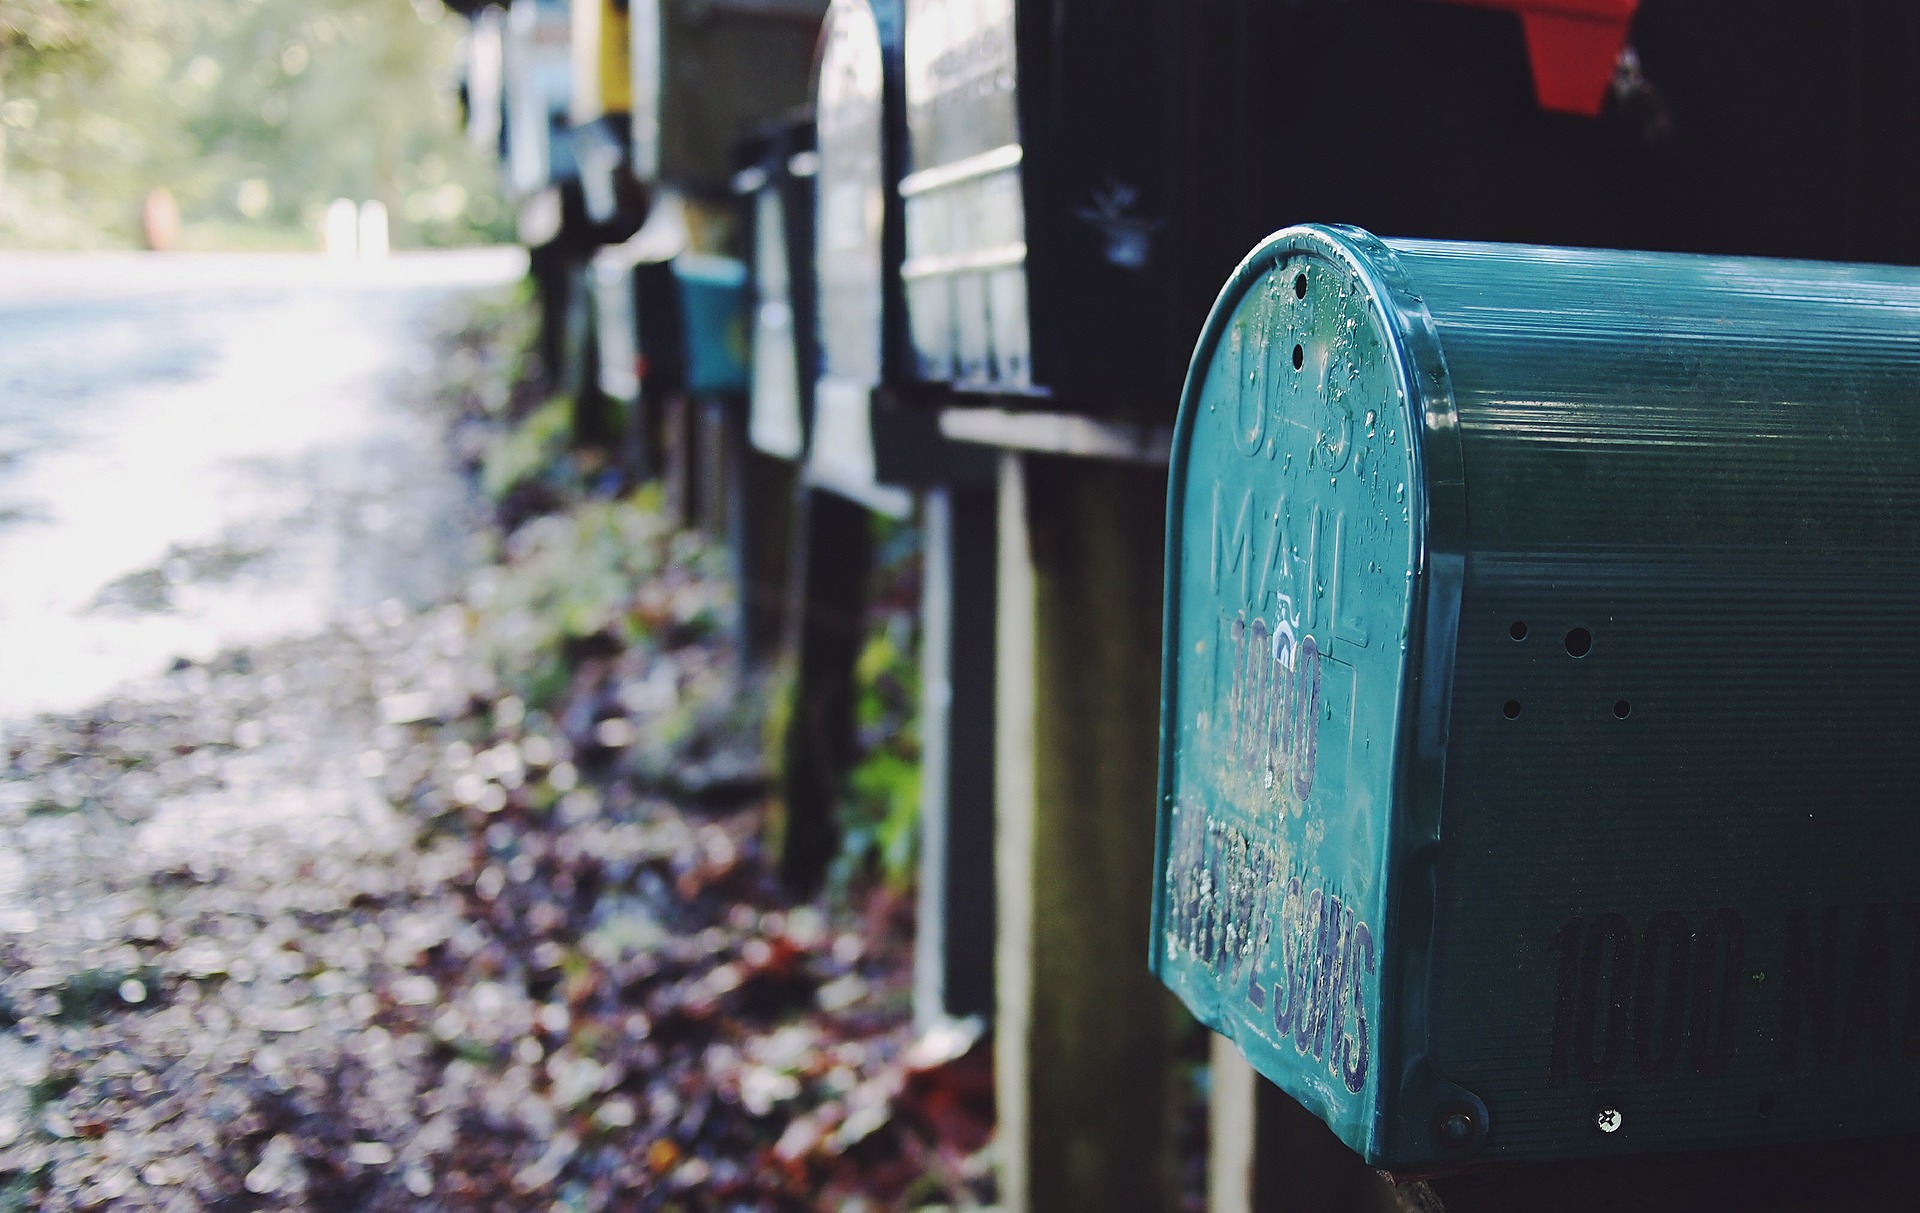 Try these direct mail ideas for your business